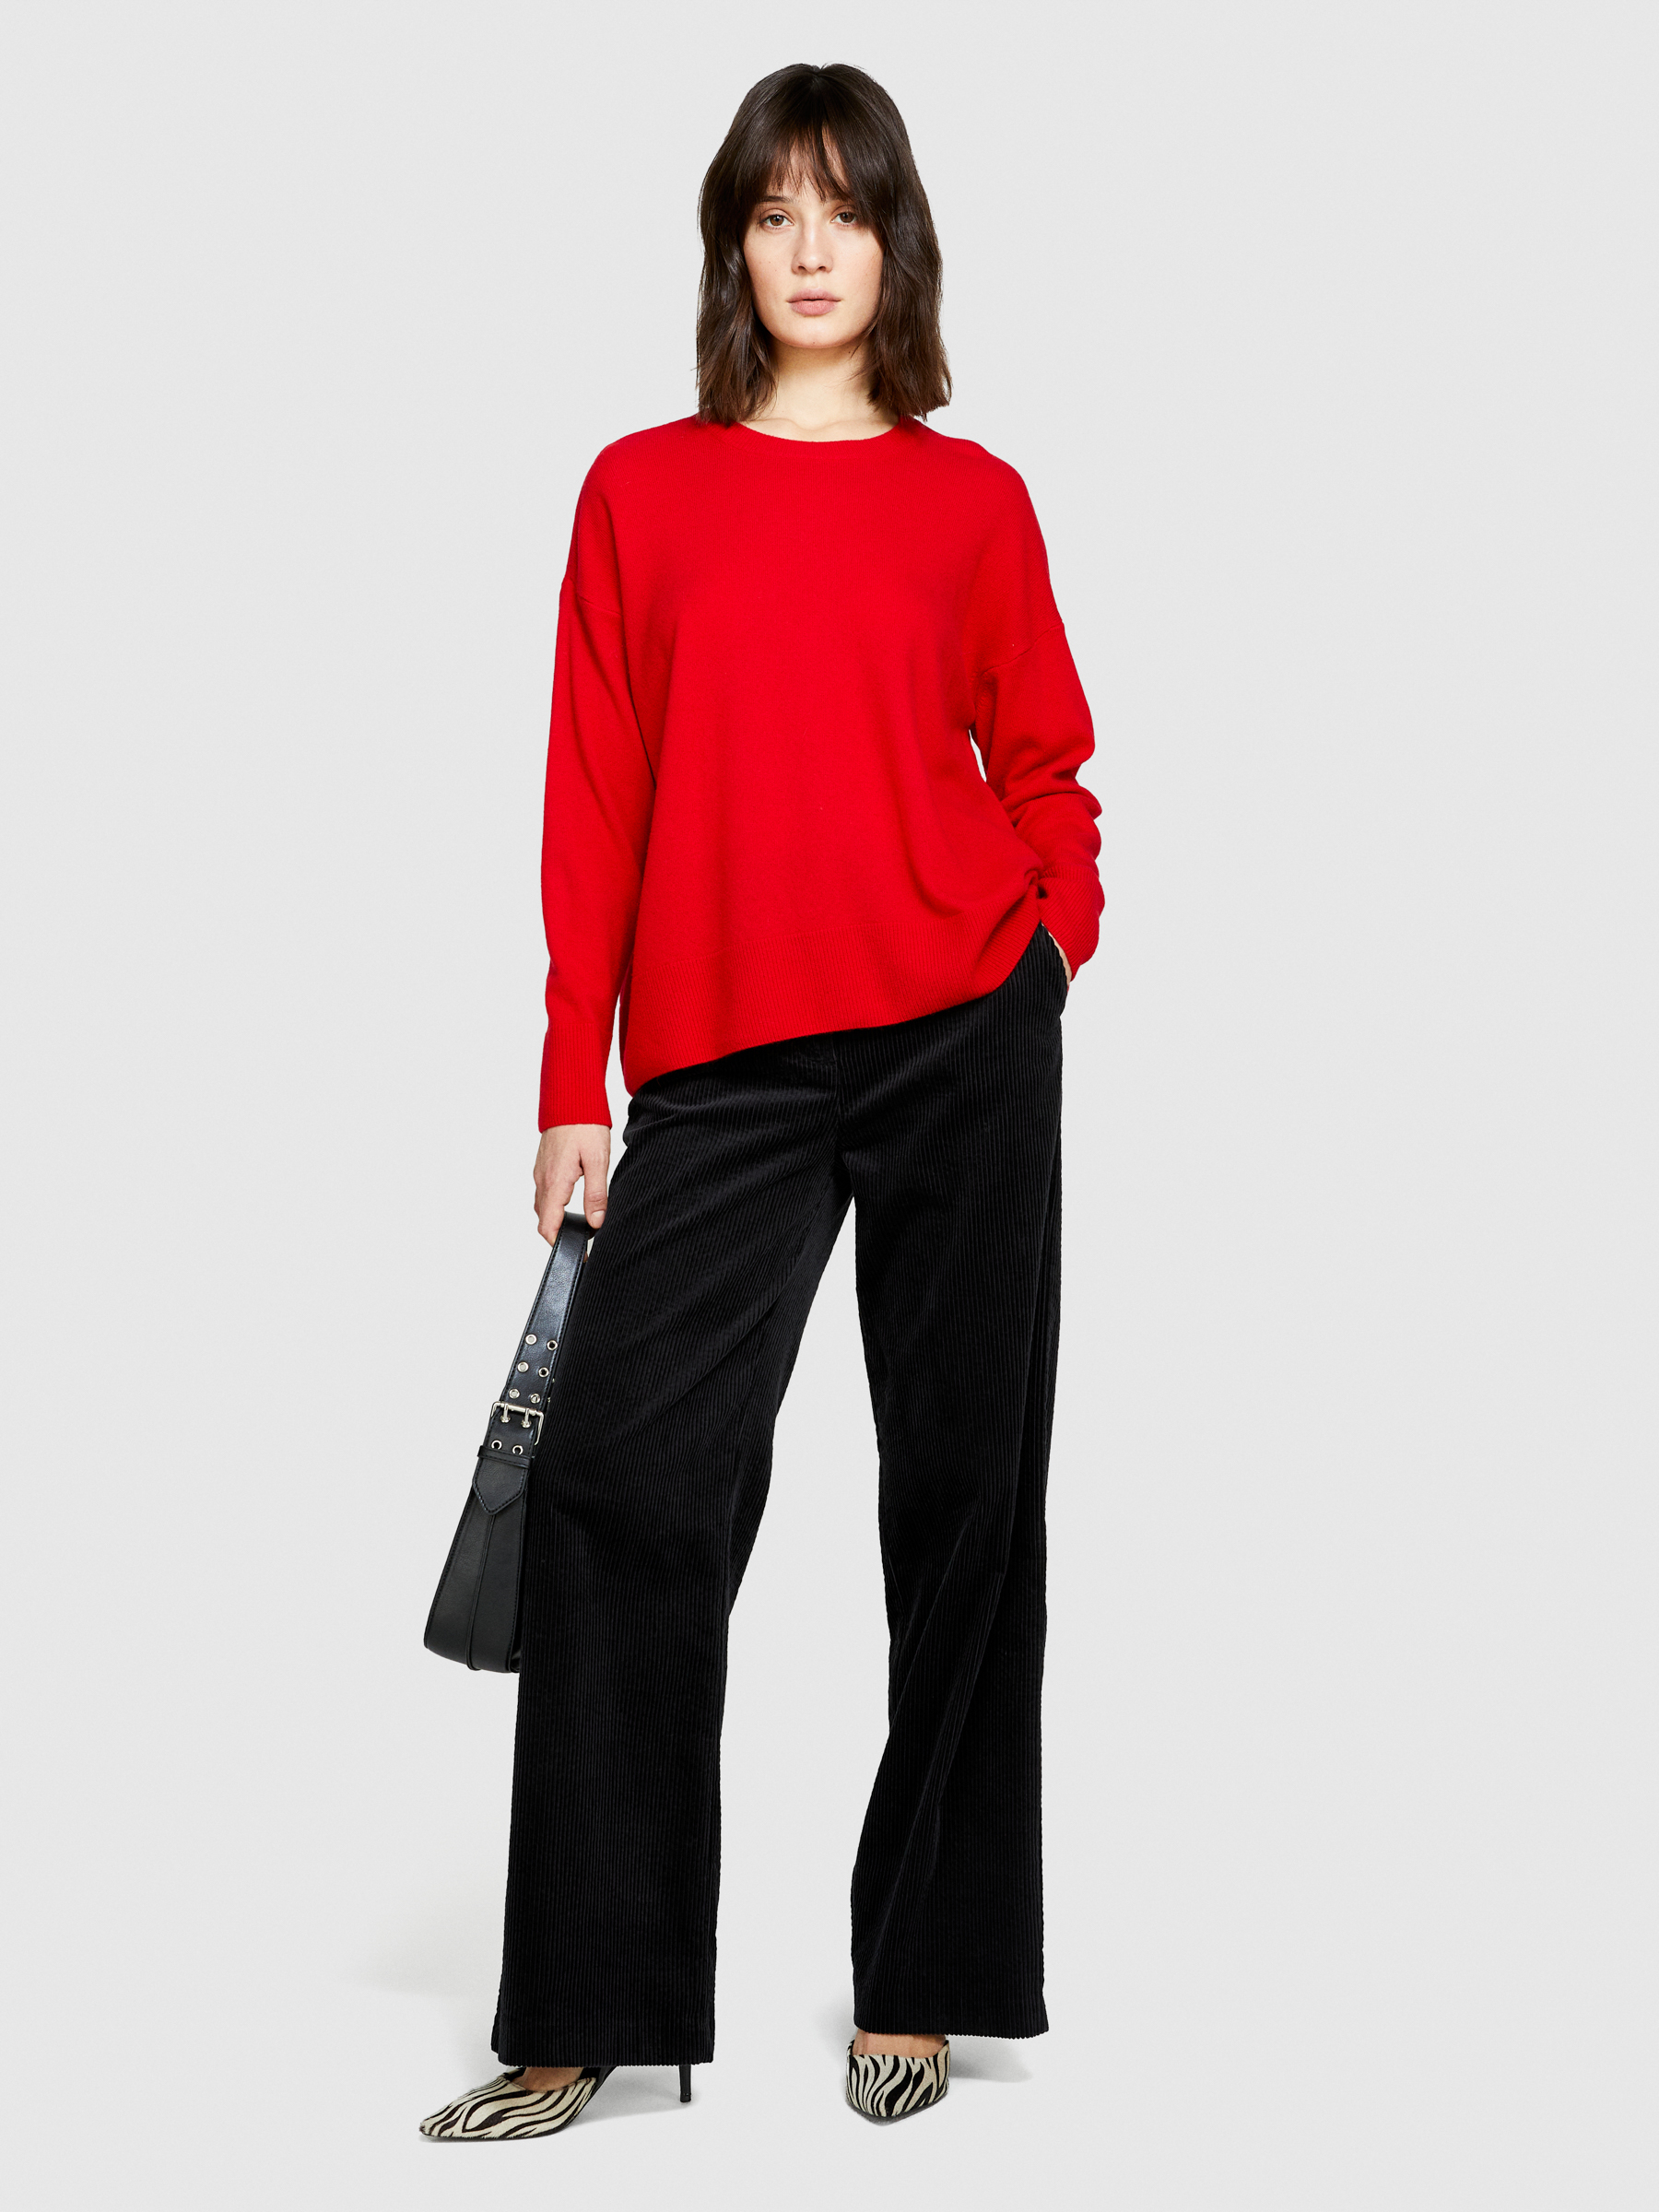 Sisley - Boxy Fit Sweater, Woman, Red, Size: S